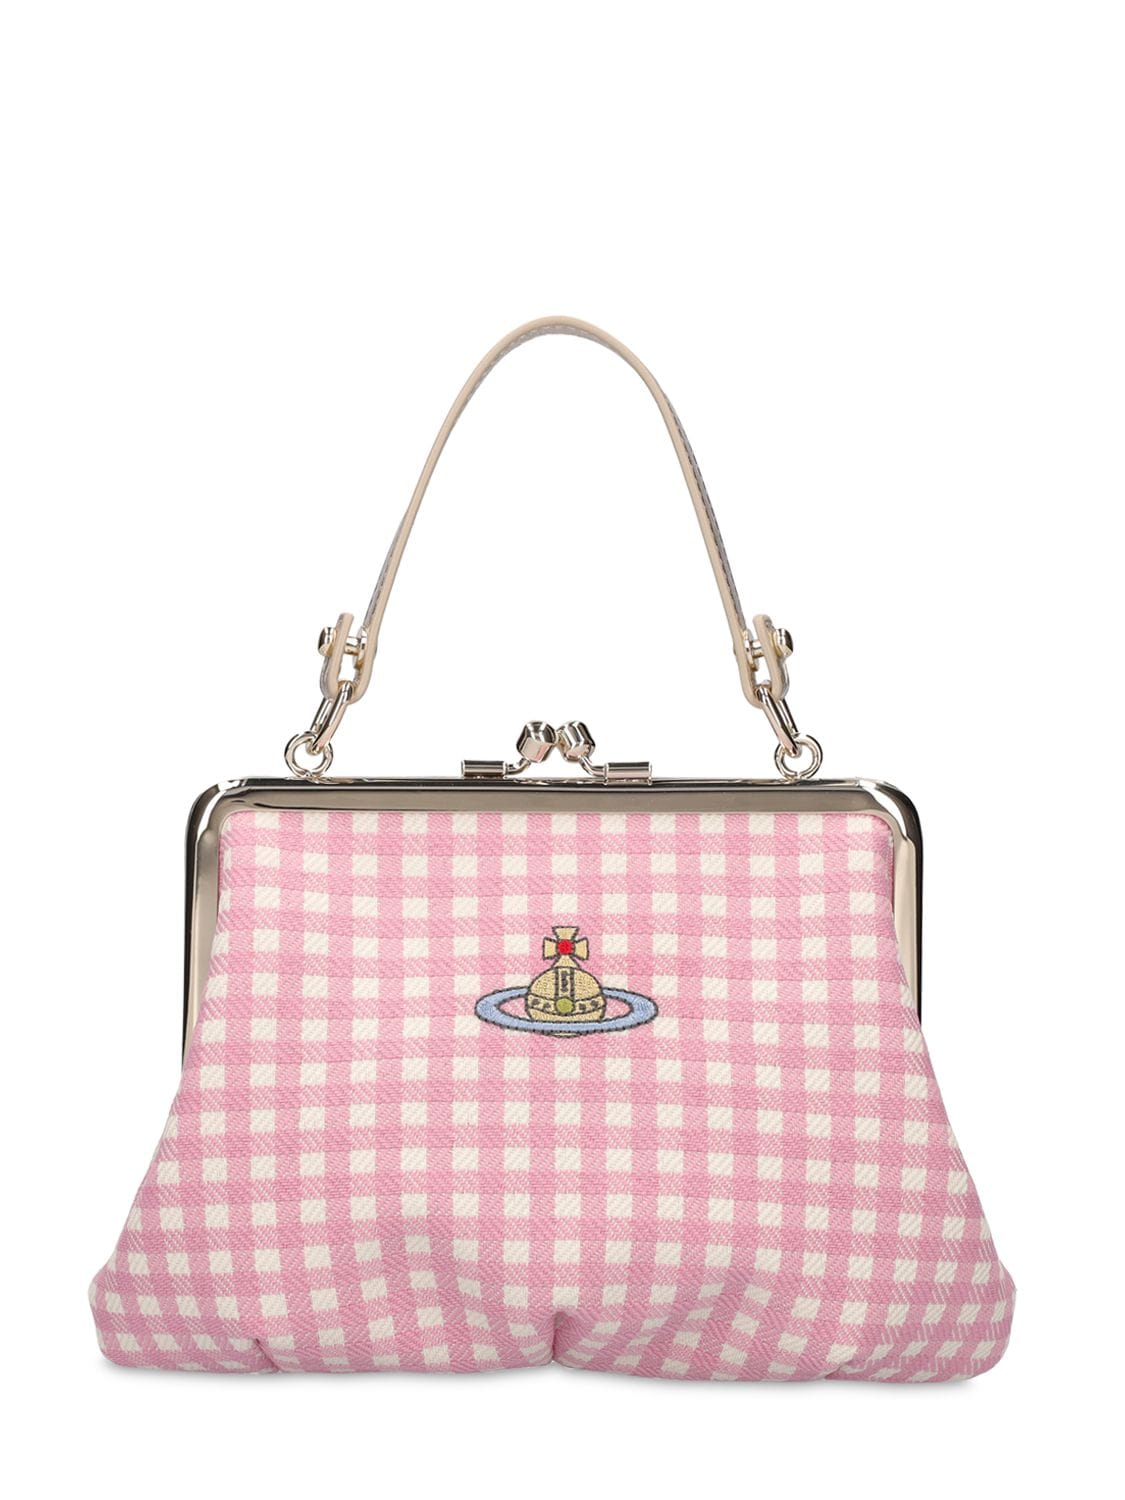 Vivienne Westwood Granny Frame Recycled Nylon Purse Bag In Pink